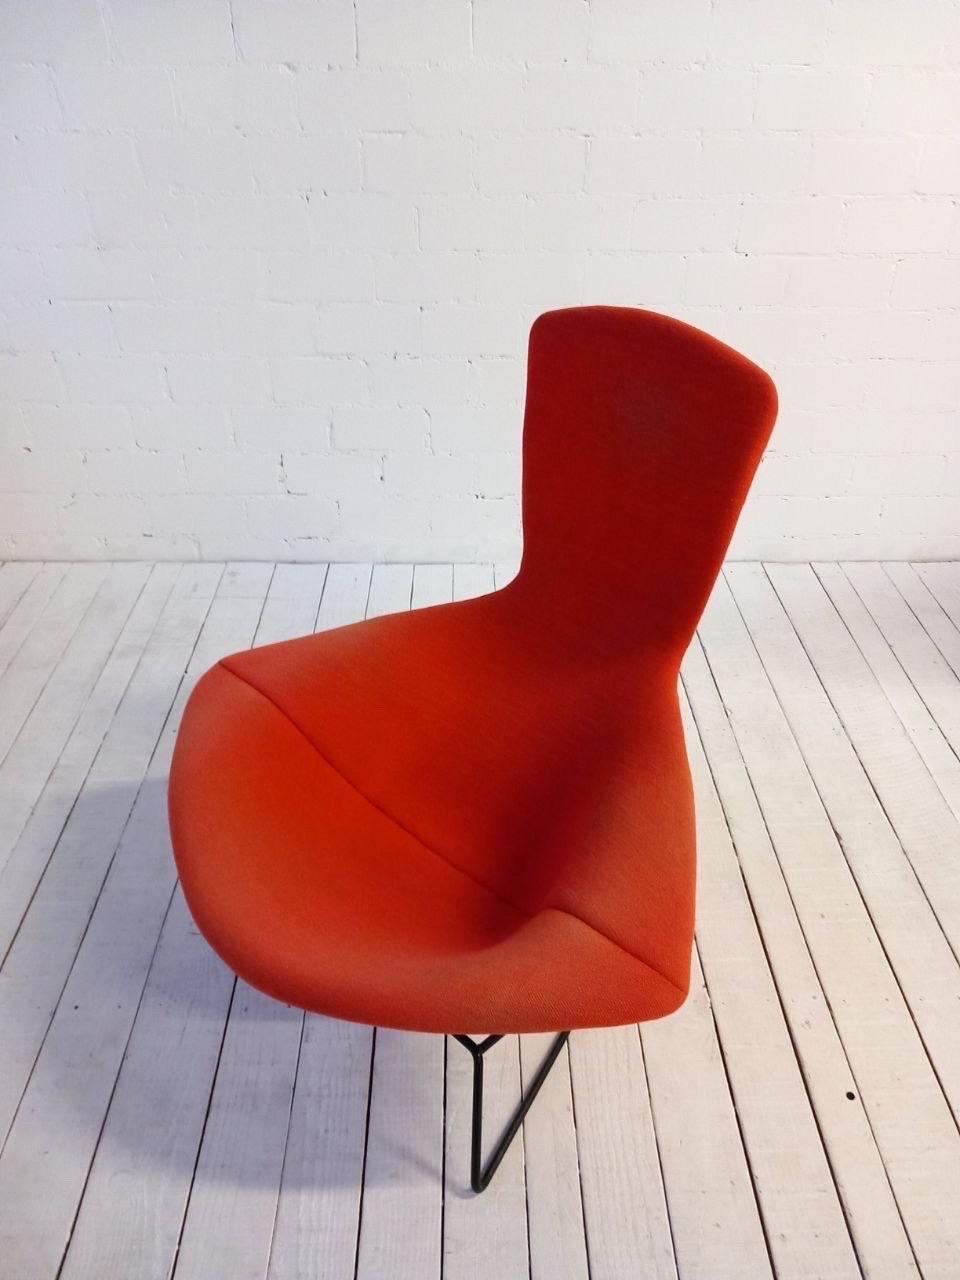 The „Bird Chair“ is the Lounge Chair version of the Harry Bertoia product family for Knoll International, designed in 1952. Black and white steel construction connected with original shock mounts. The chair comes with original red upholstery. 